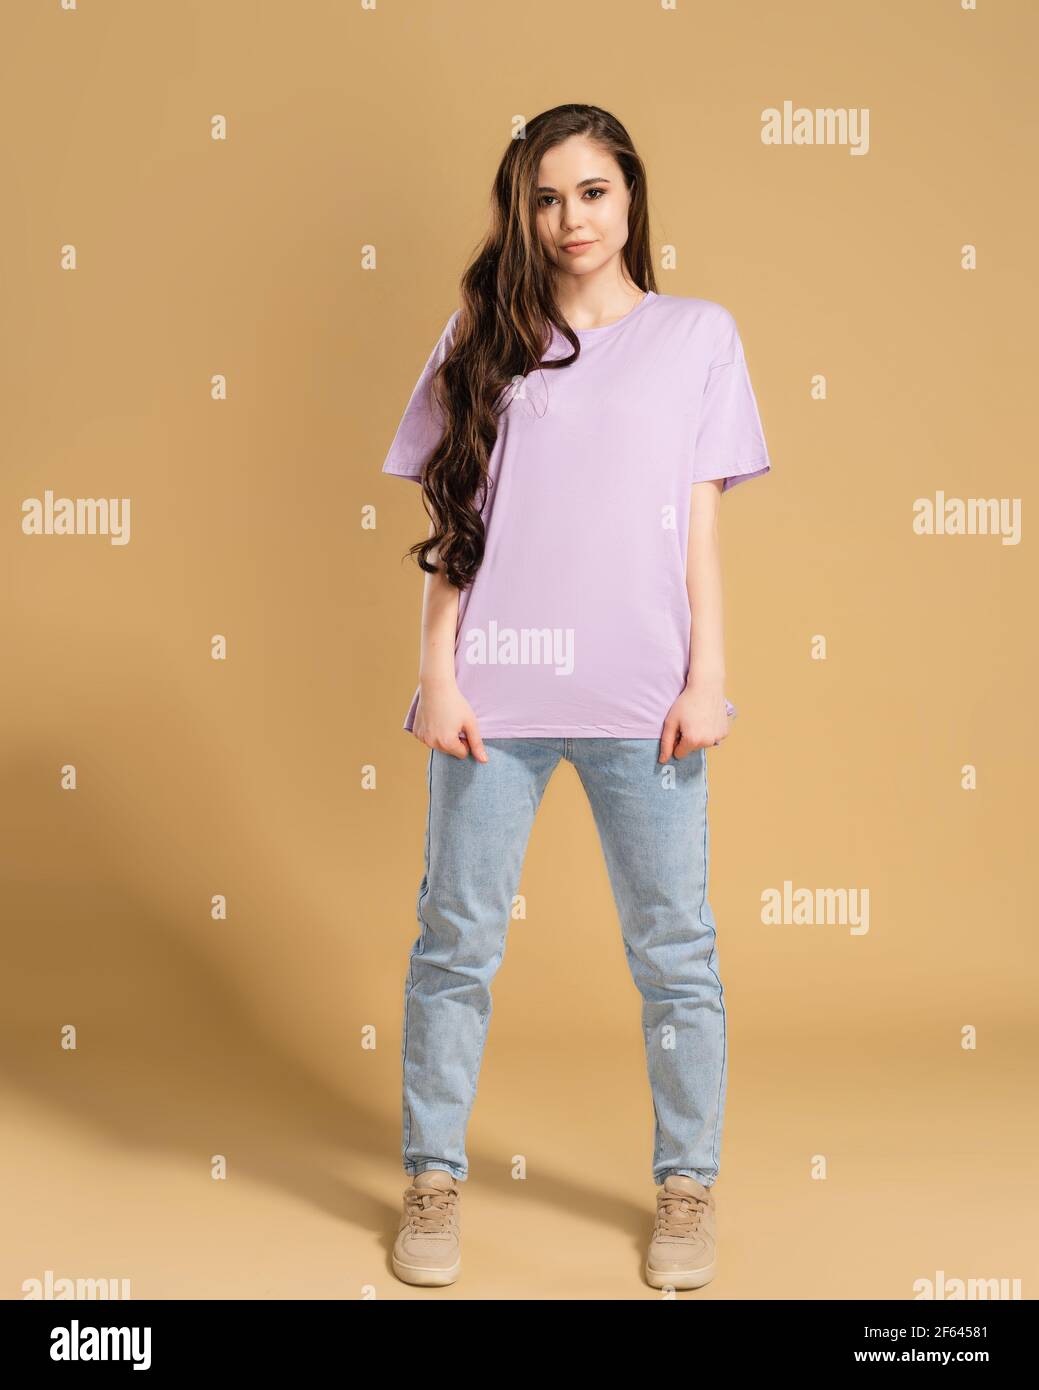 Young beautiful girl with long curly hair in a lilac T-shirt and blue jeans on a pastel orange studio background. T-shirt mockup. Stock Photo